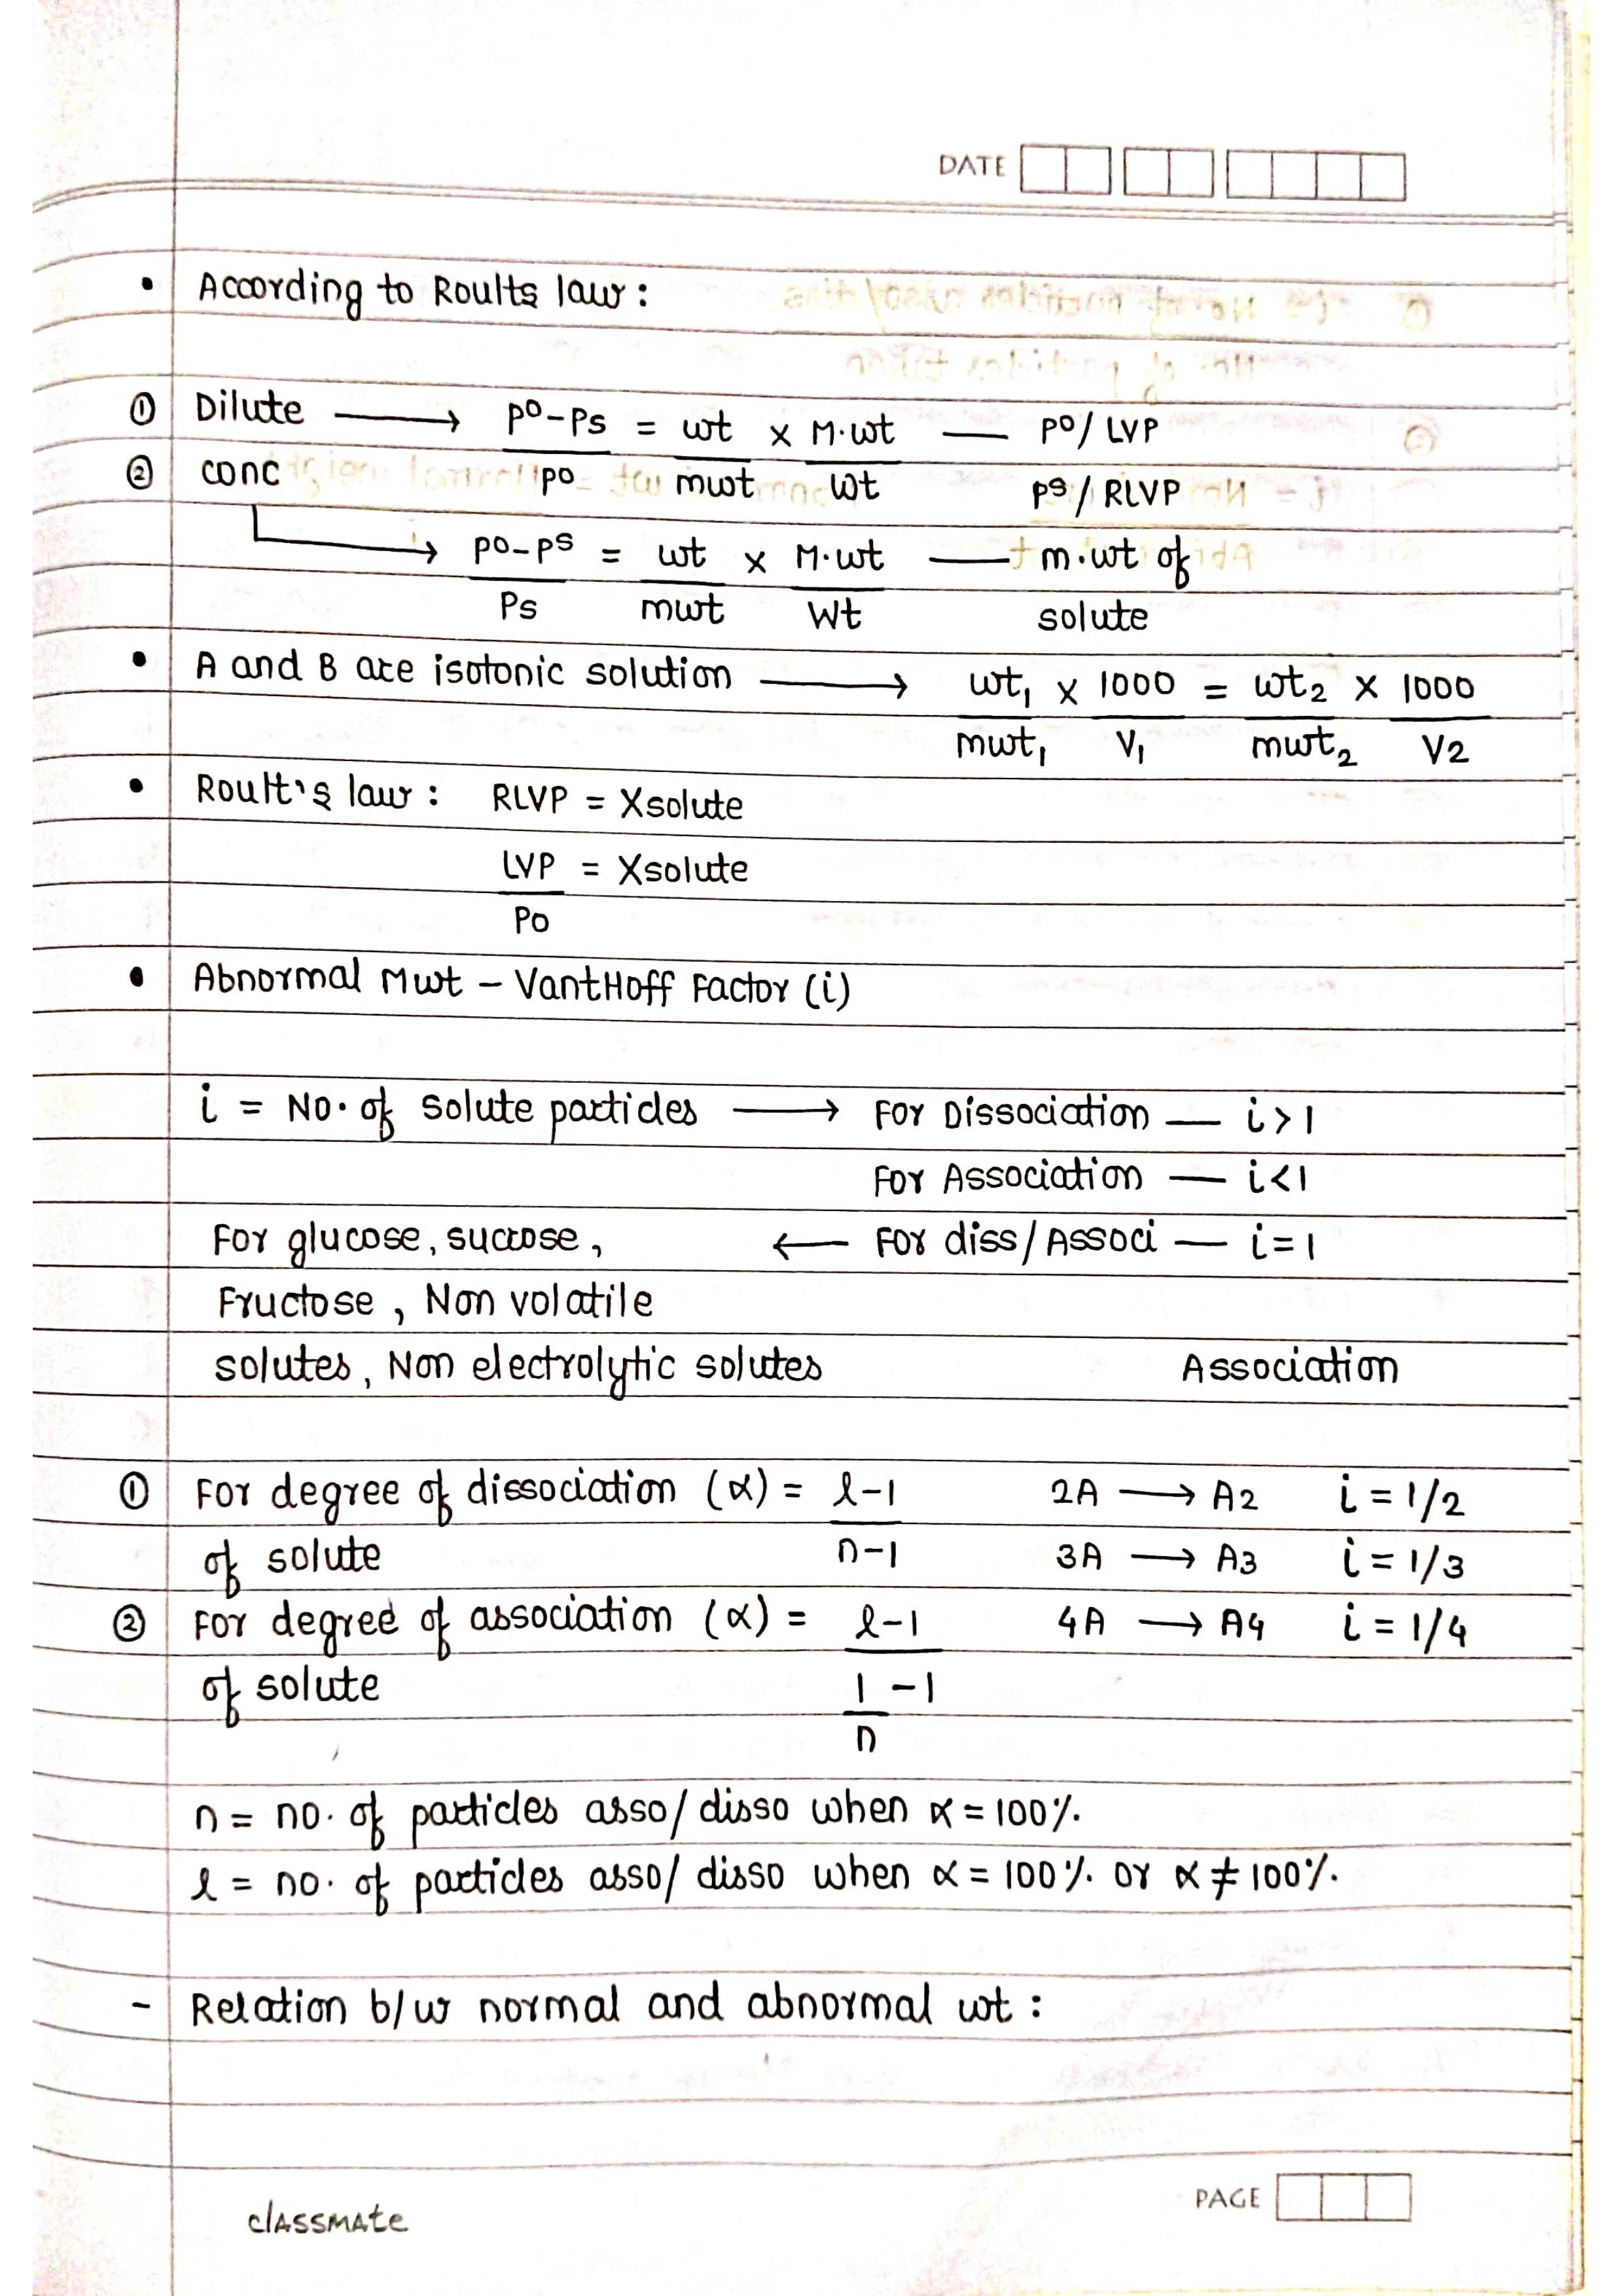 Solutions - Chemistry Short Notes 📚